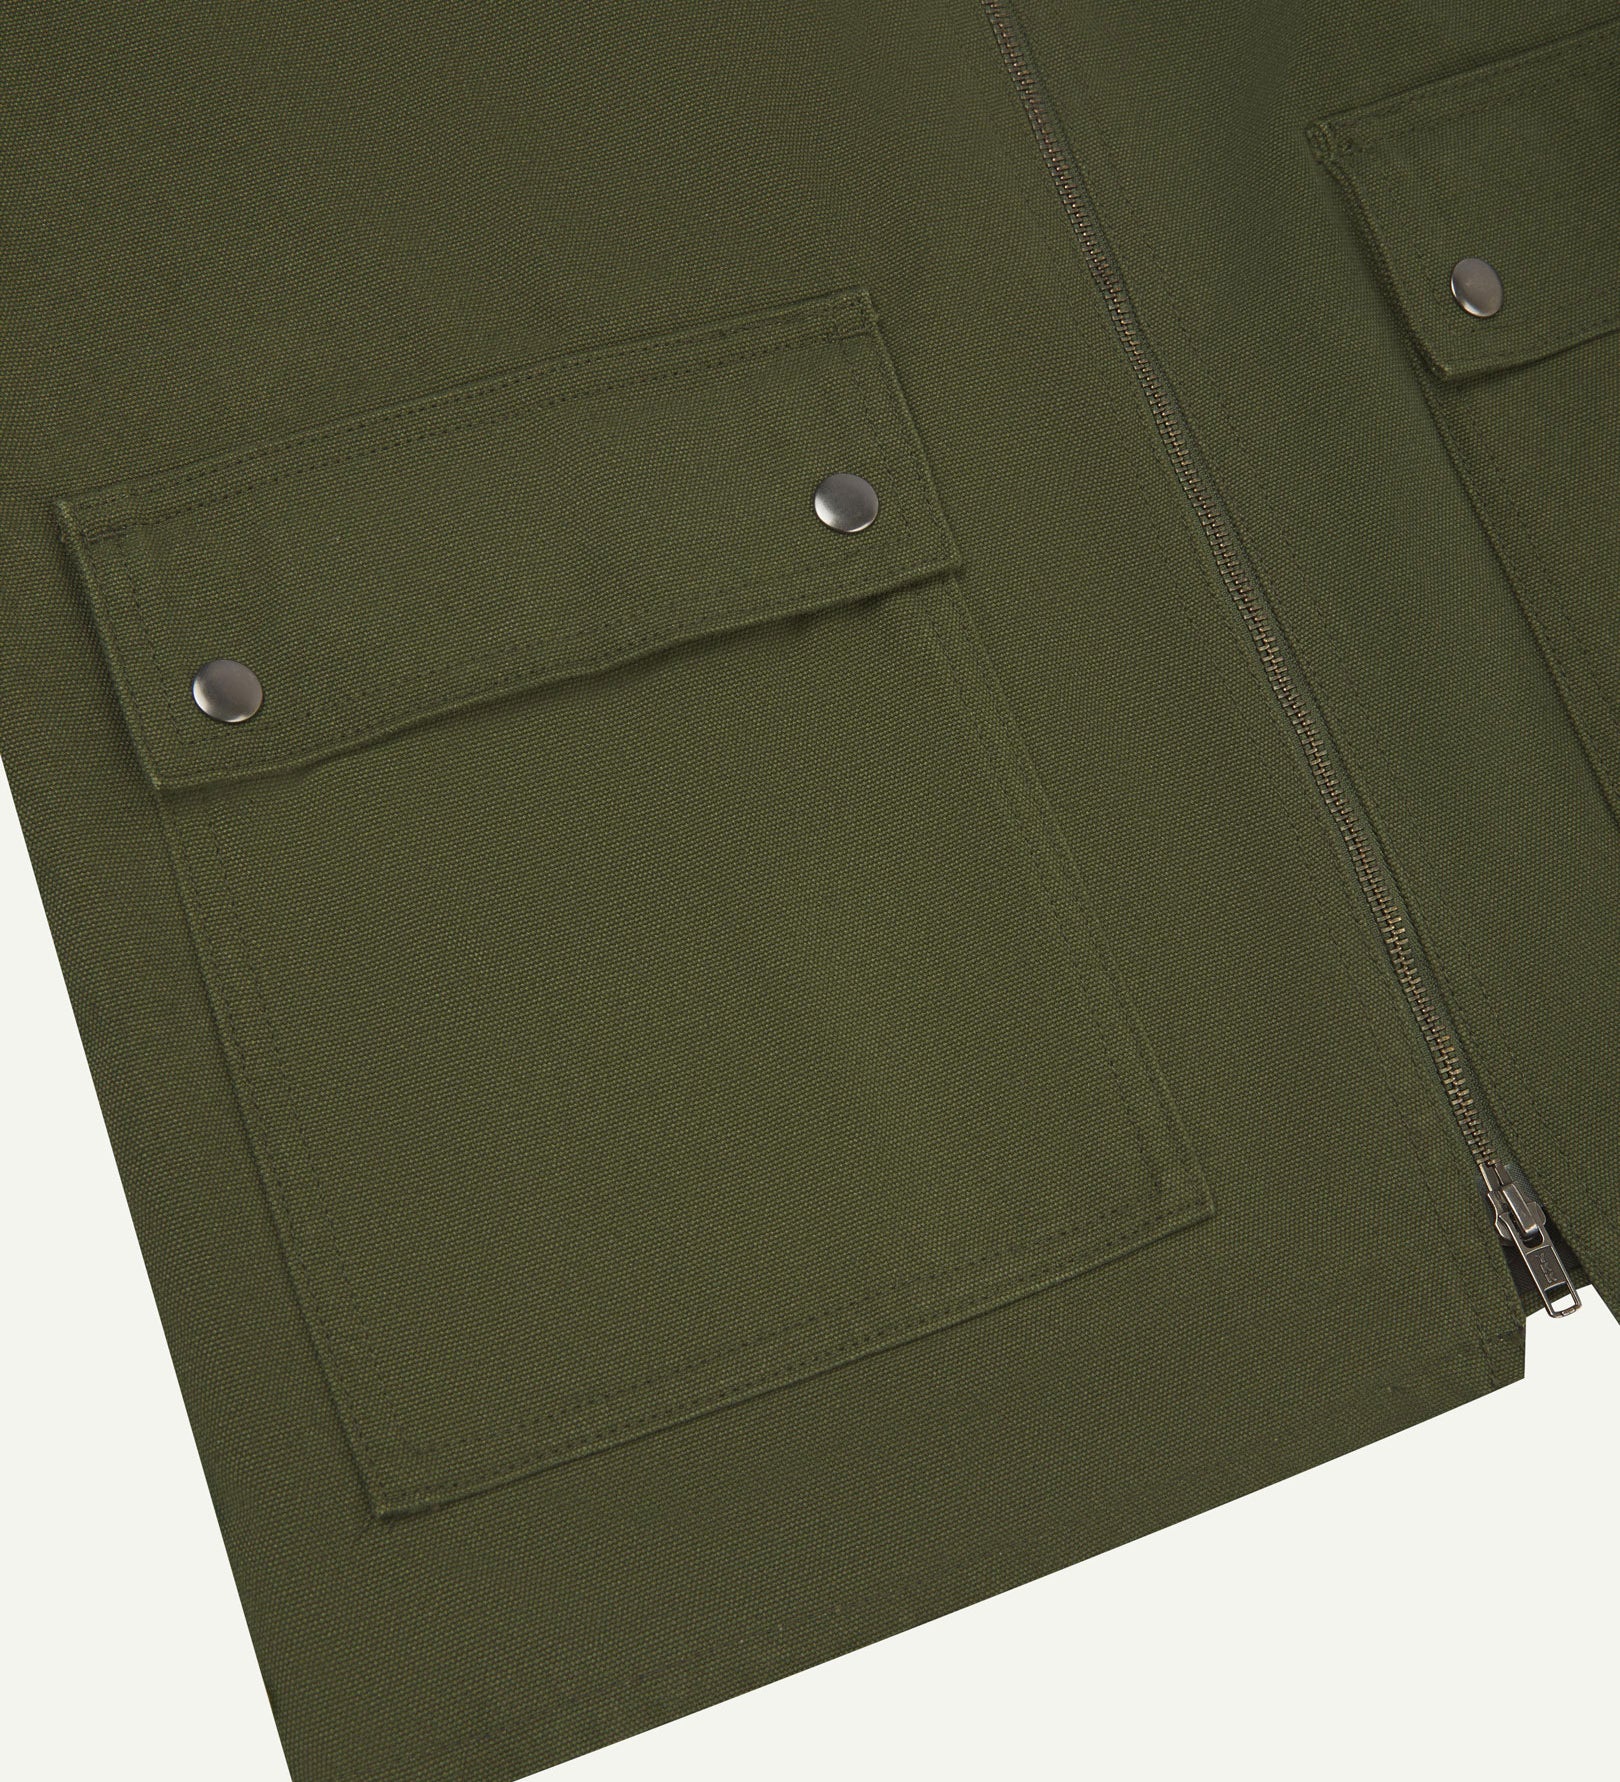 Front flat close-up shot of Uskees coriander-green zip front vest-waistcoat showing the front flap pockets with metal poppers and double-ended zip